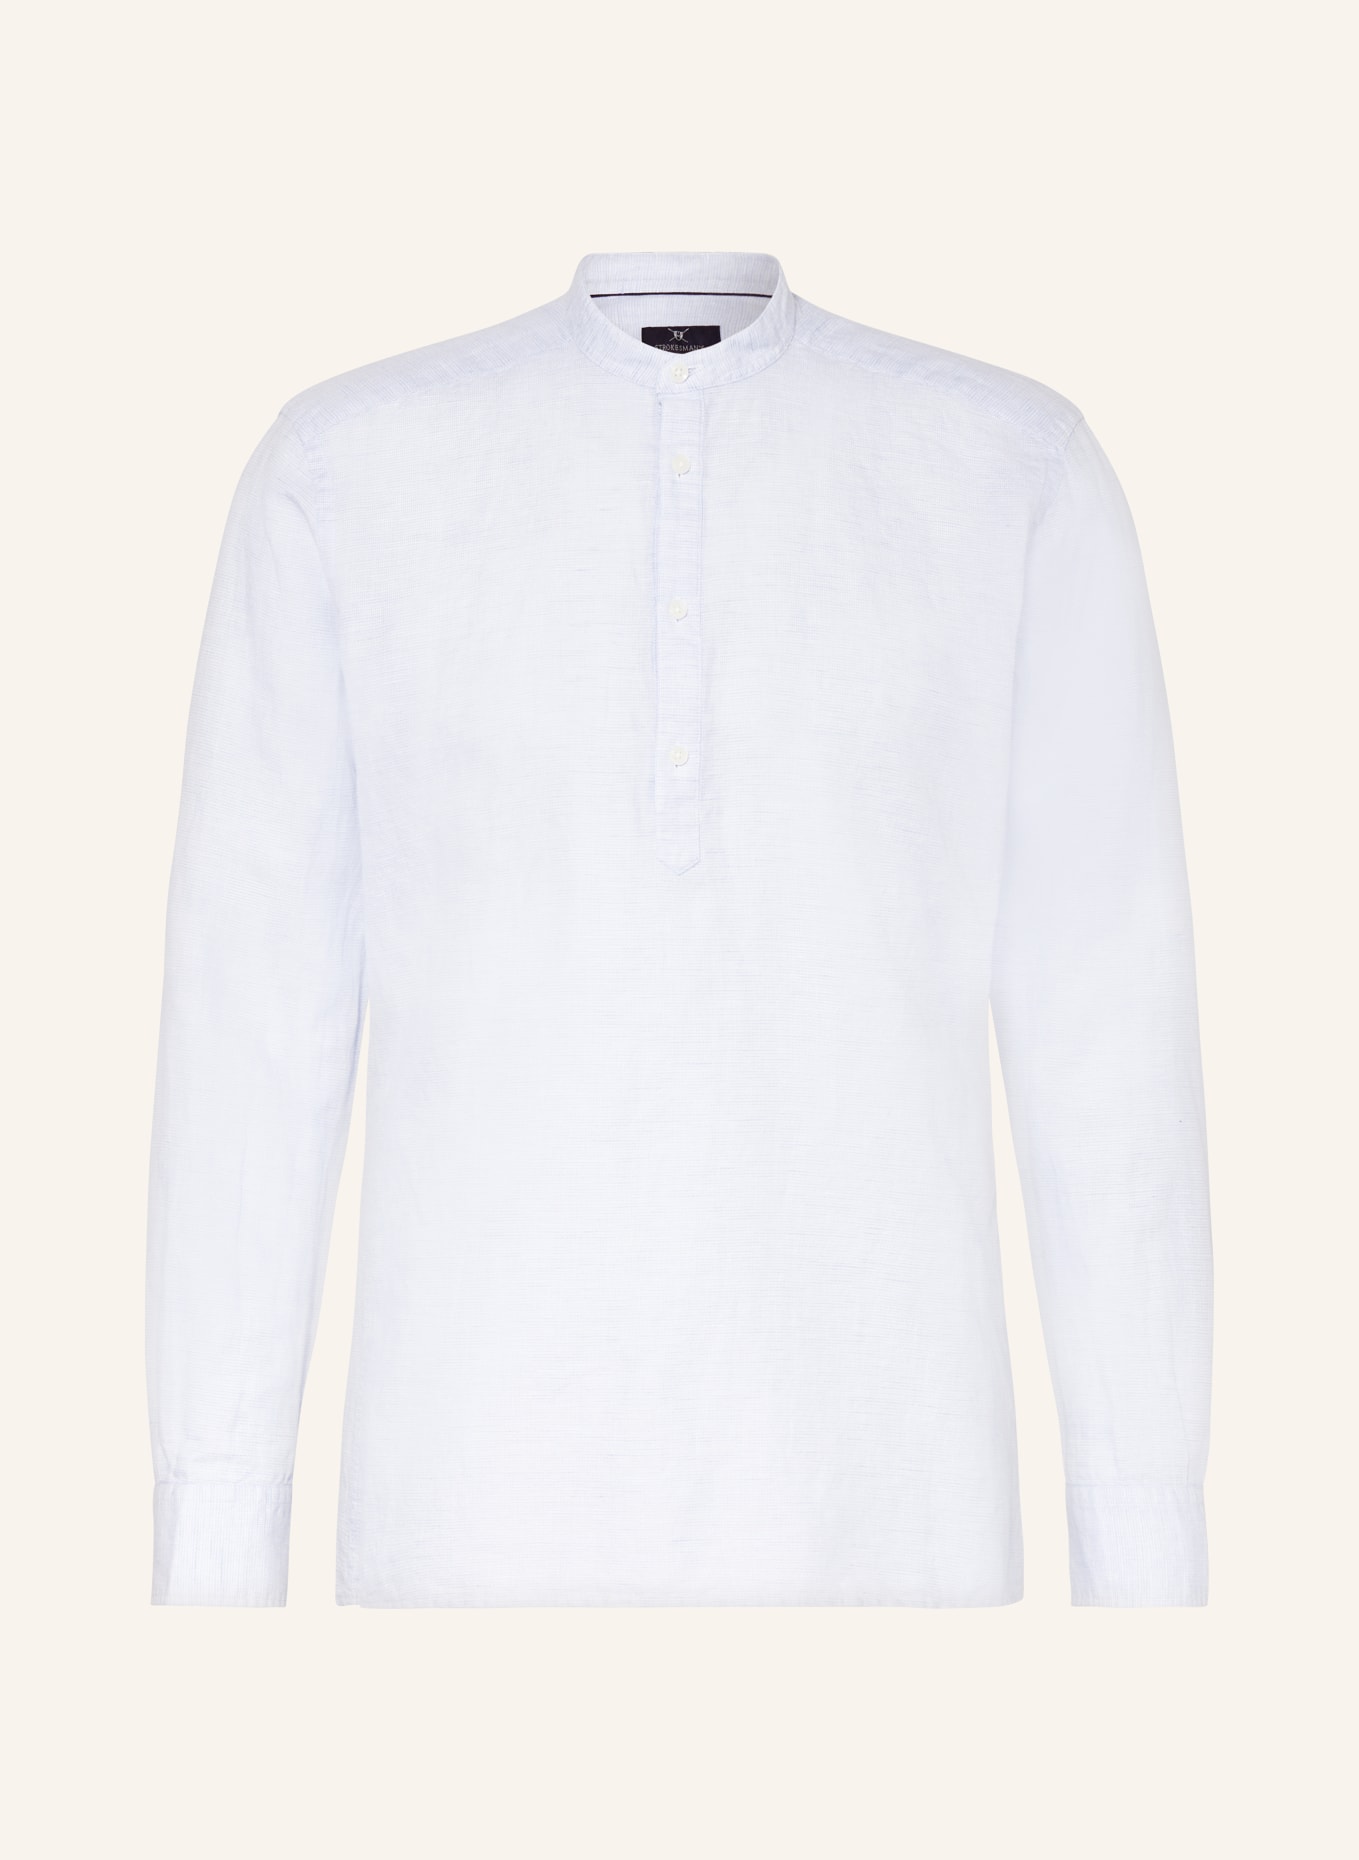 STROKESMAN'S Shirt regular fit with stand-up collar and linen, Color: LIGHT BLUE (Image 1)